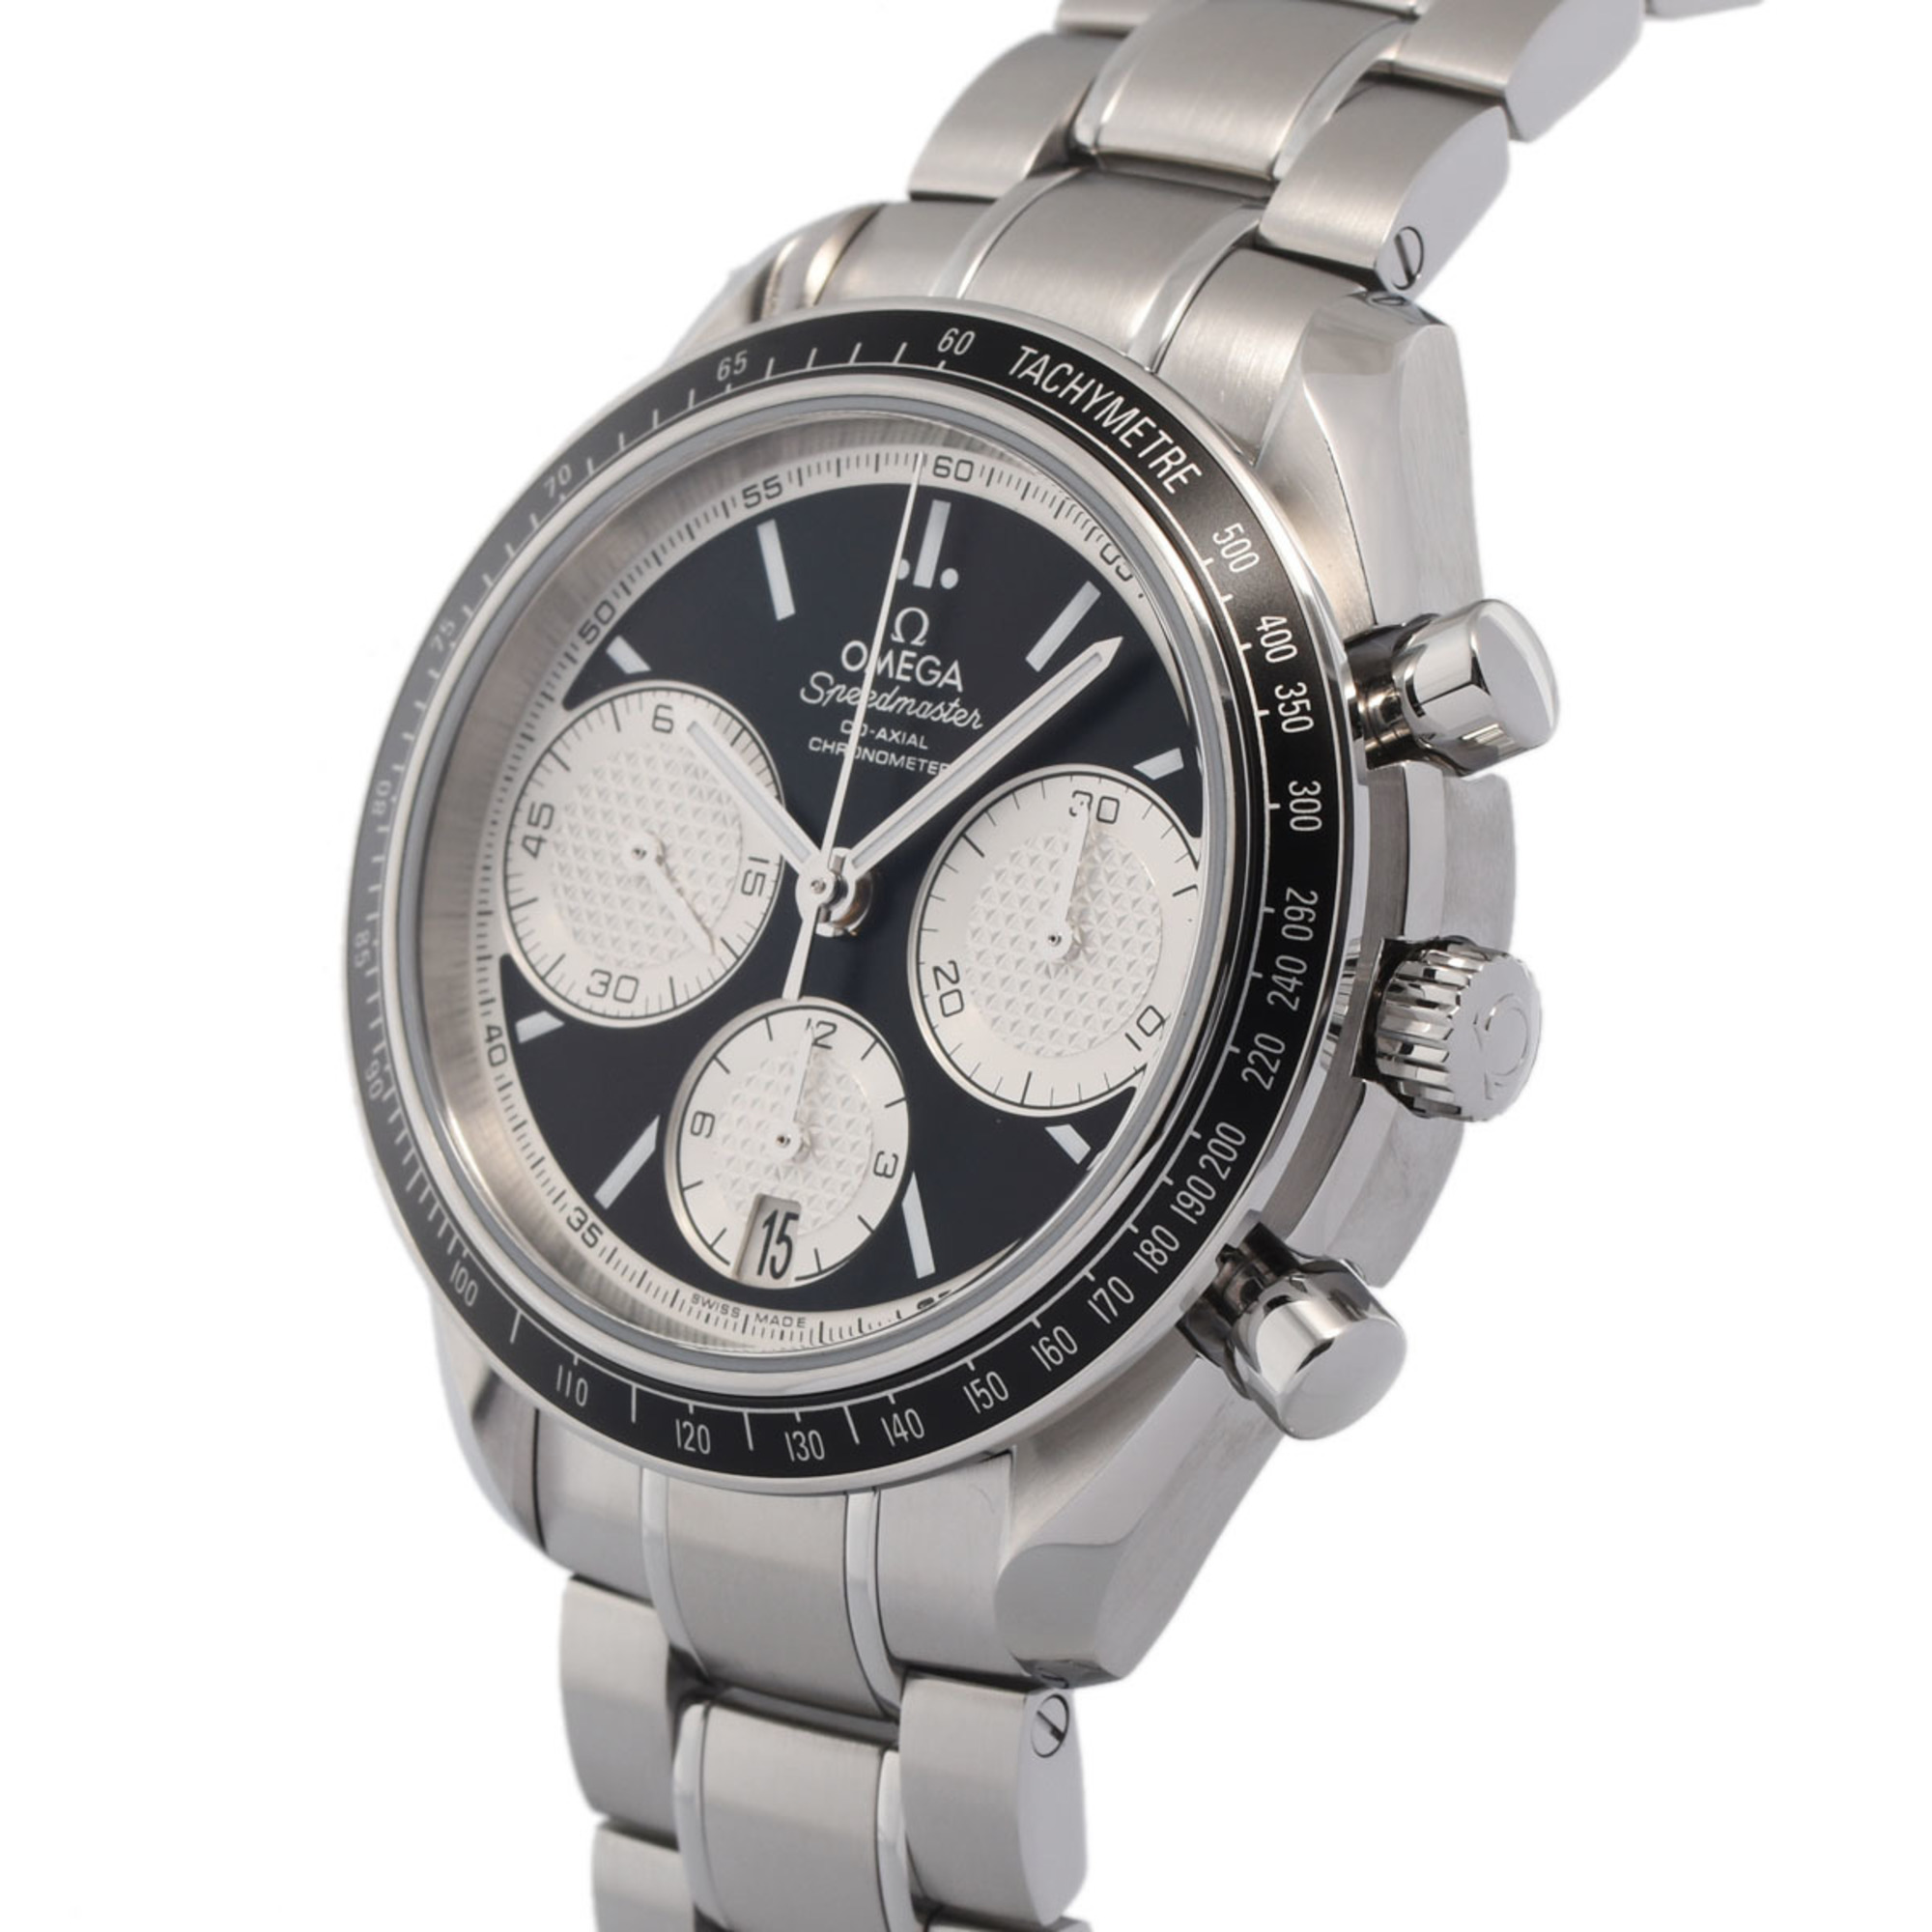 OMEGA Speedmaster Racing Chrono 326.30.40.50.01.002 Men's SS Watch Automatic Black/Silver Dial